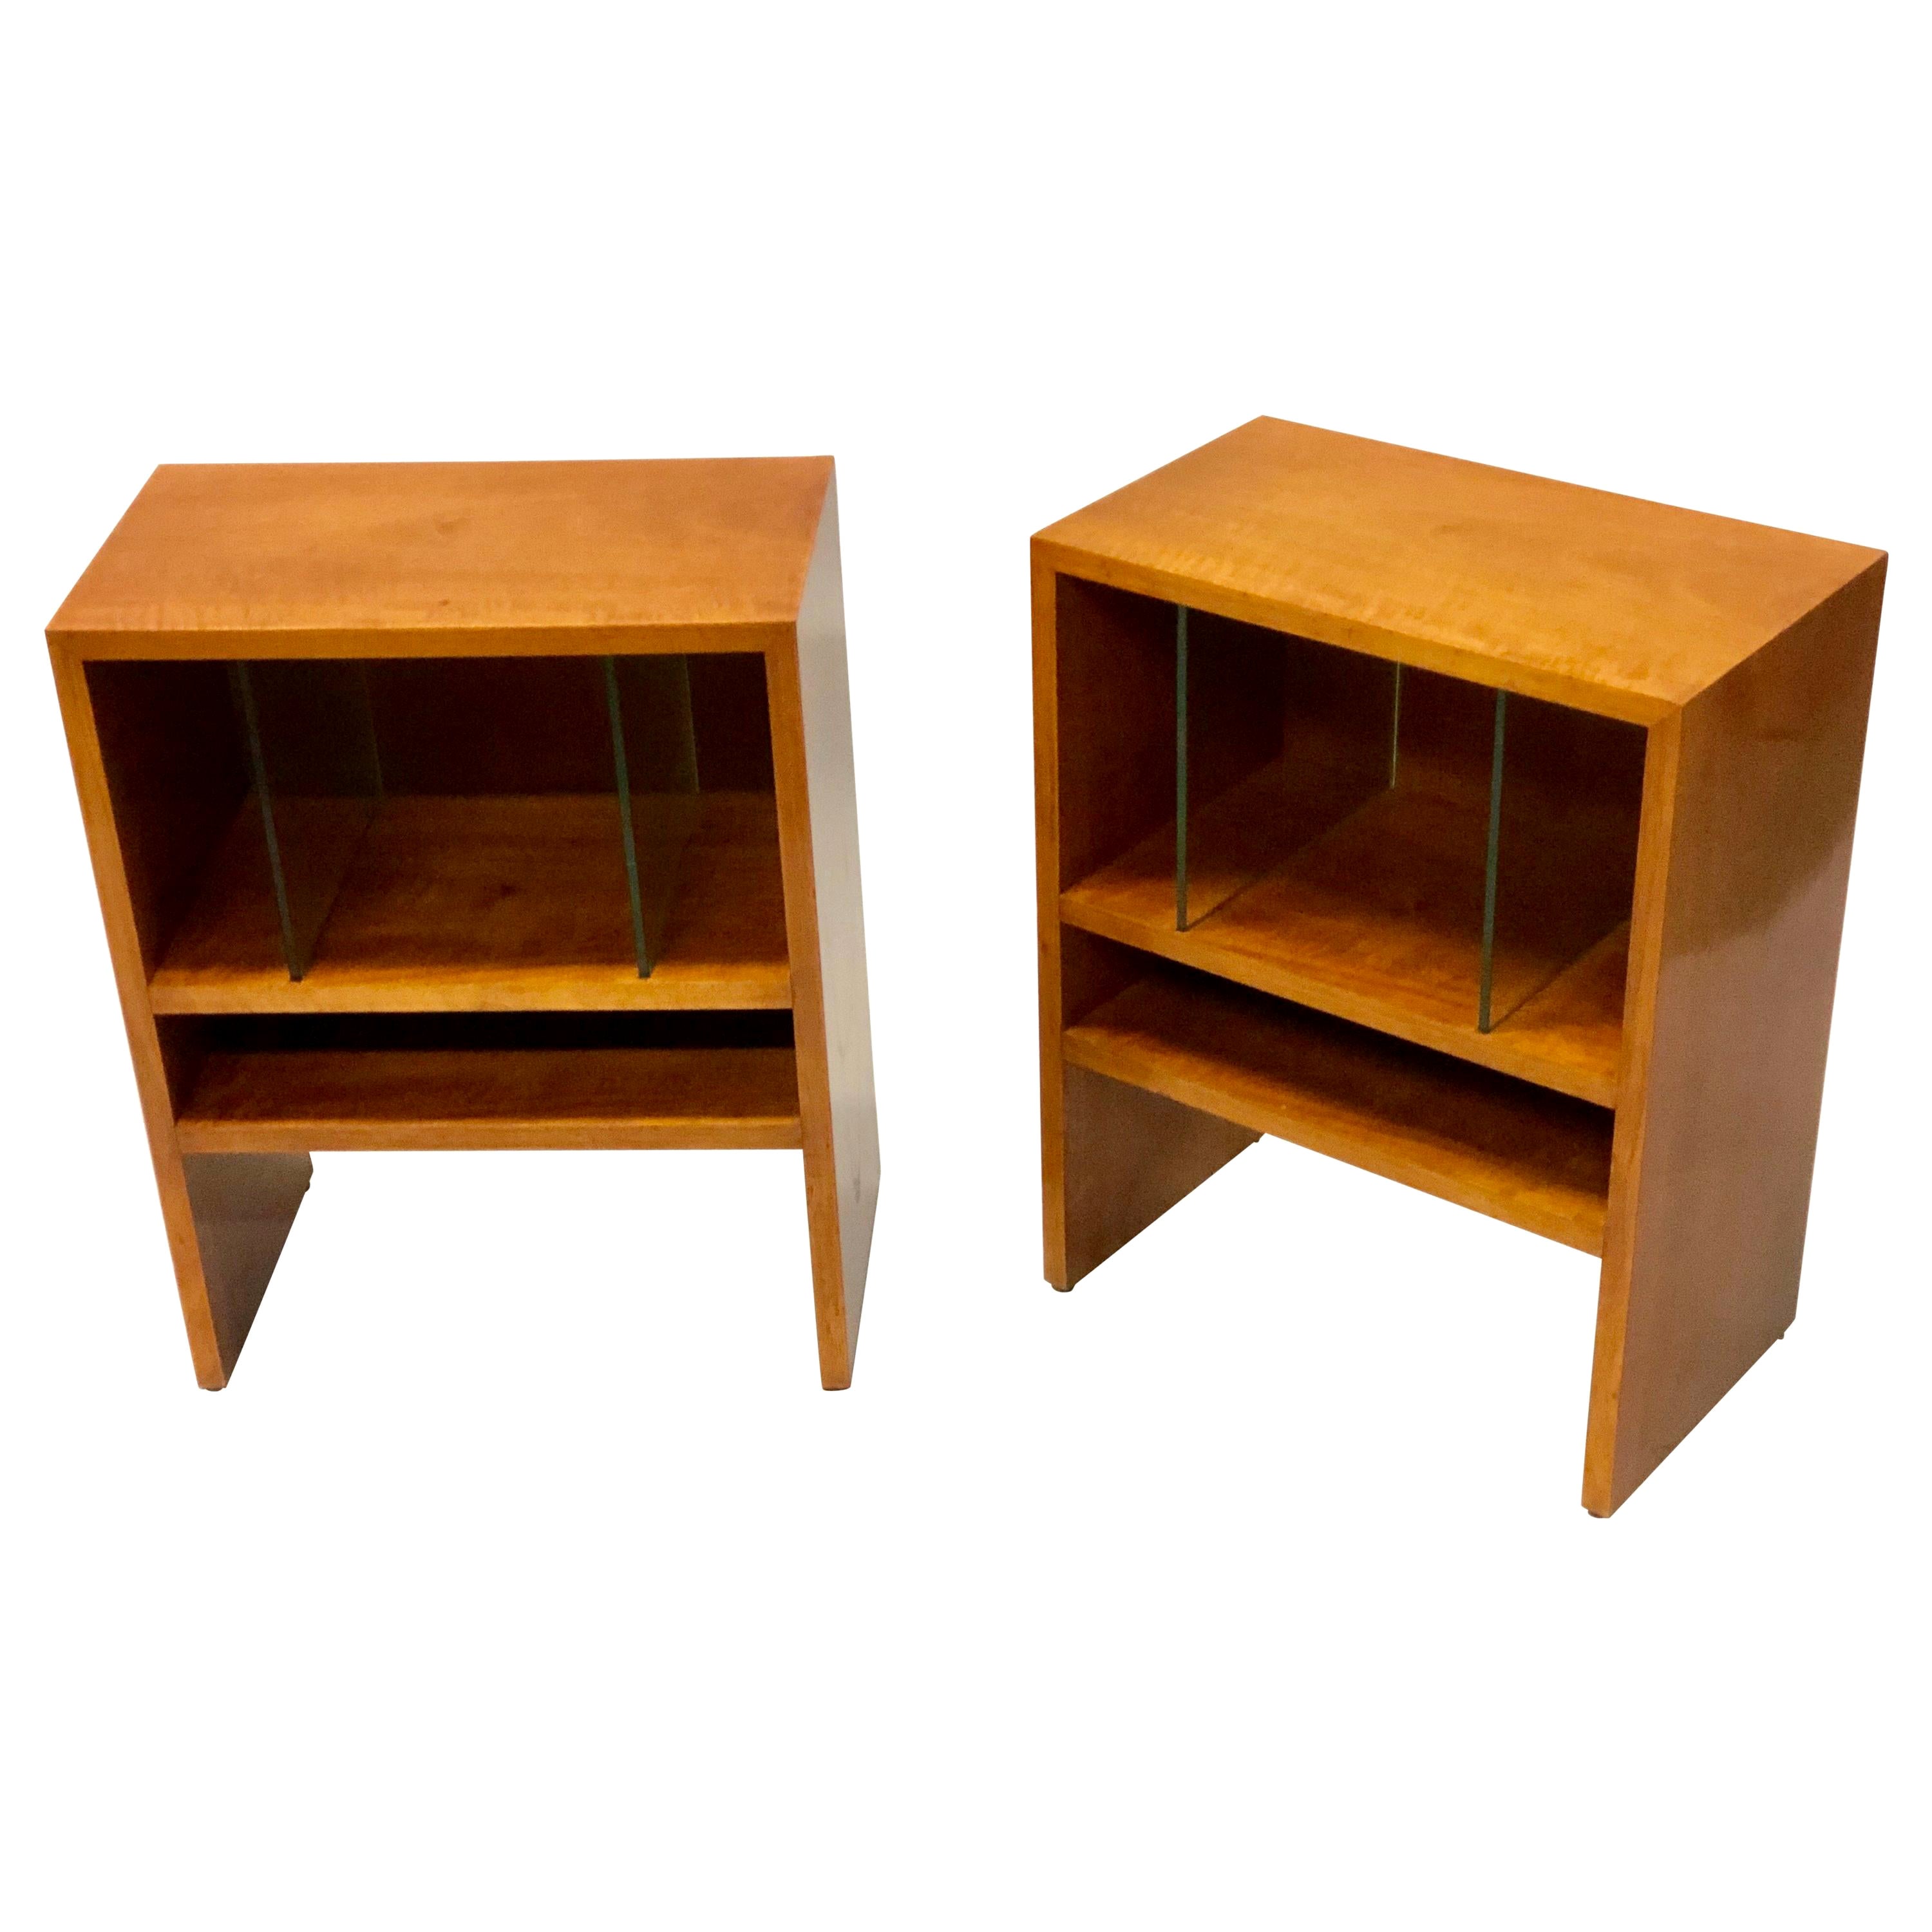 Pair of Italian Rationalist Nightstands or End Tables in Style of Terragni, 1930 For Sale